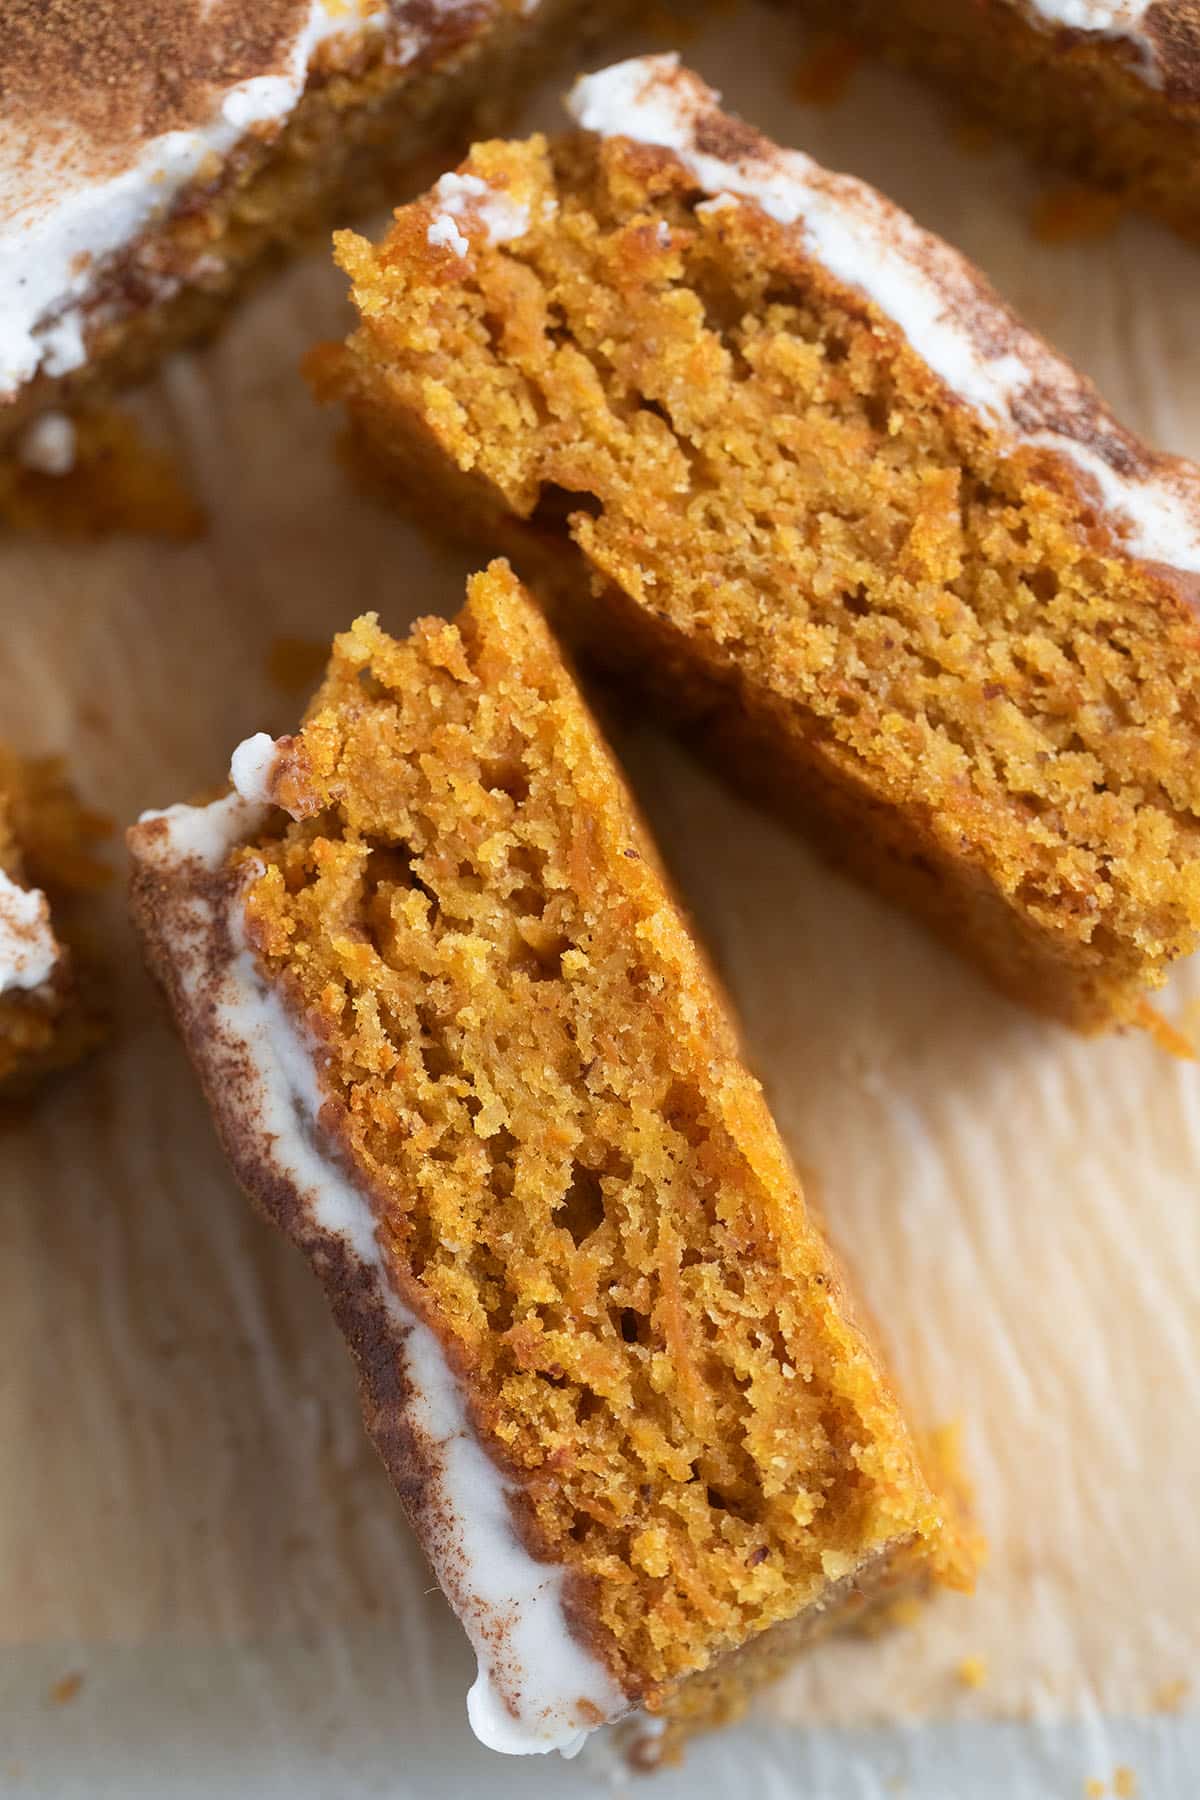 slices of carrot cake showing the crumb.